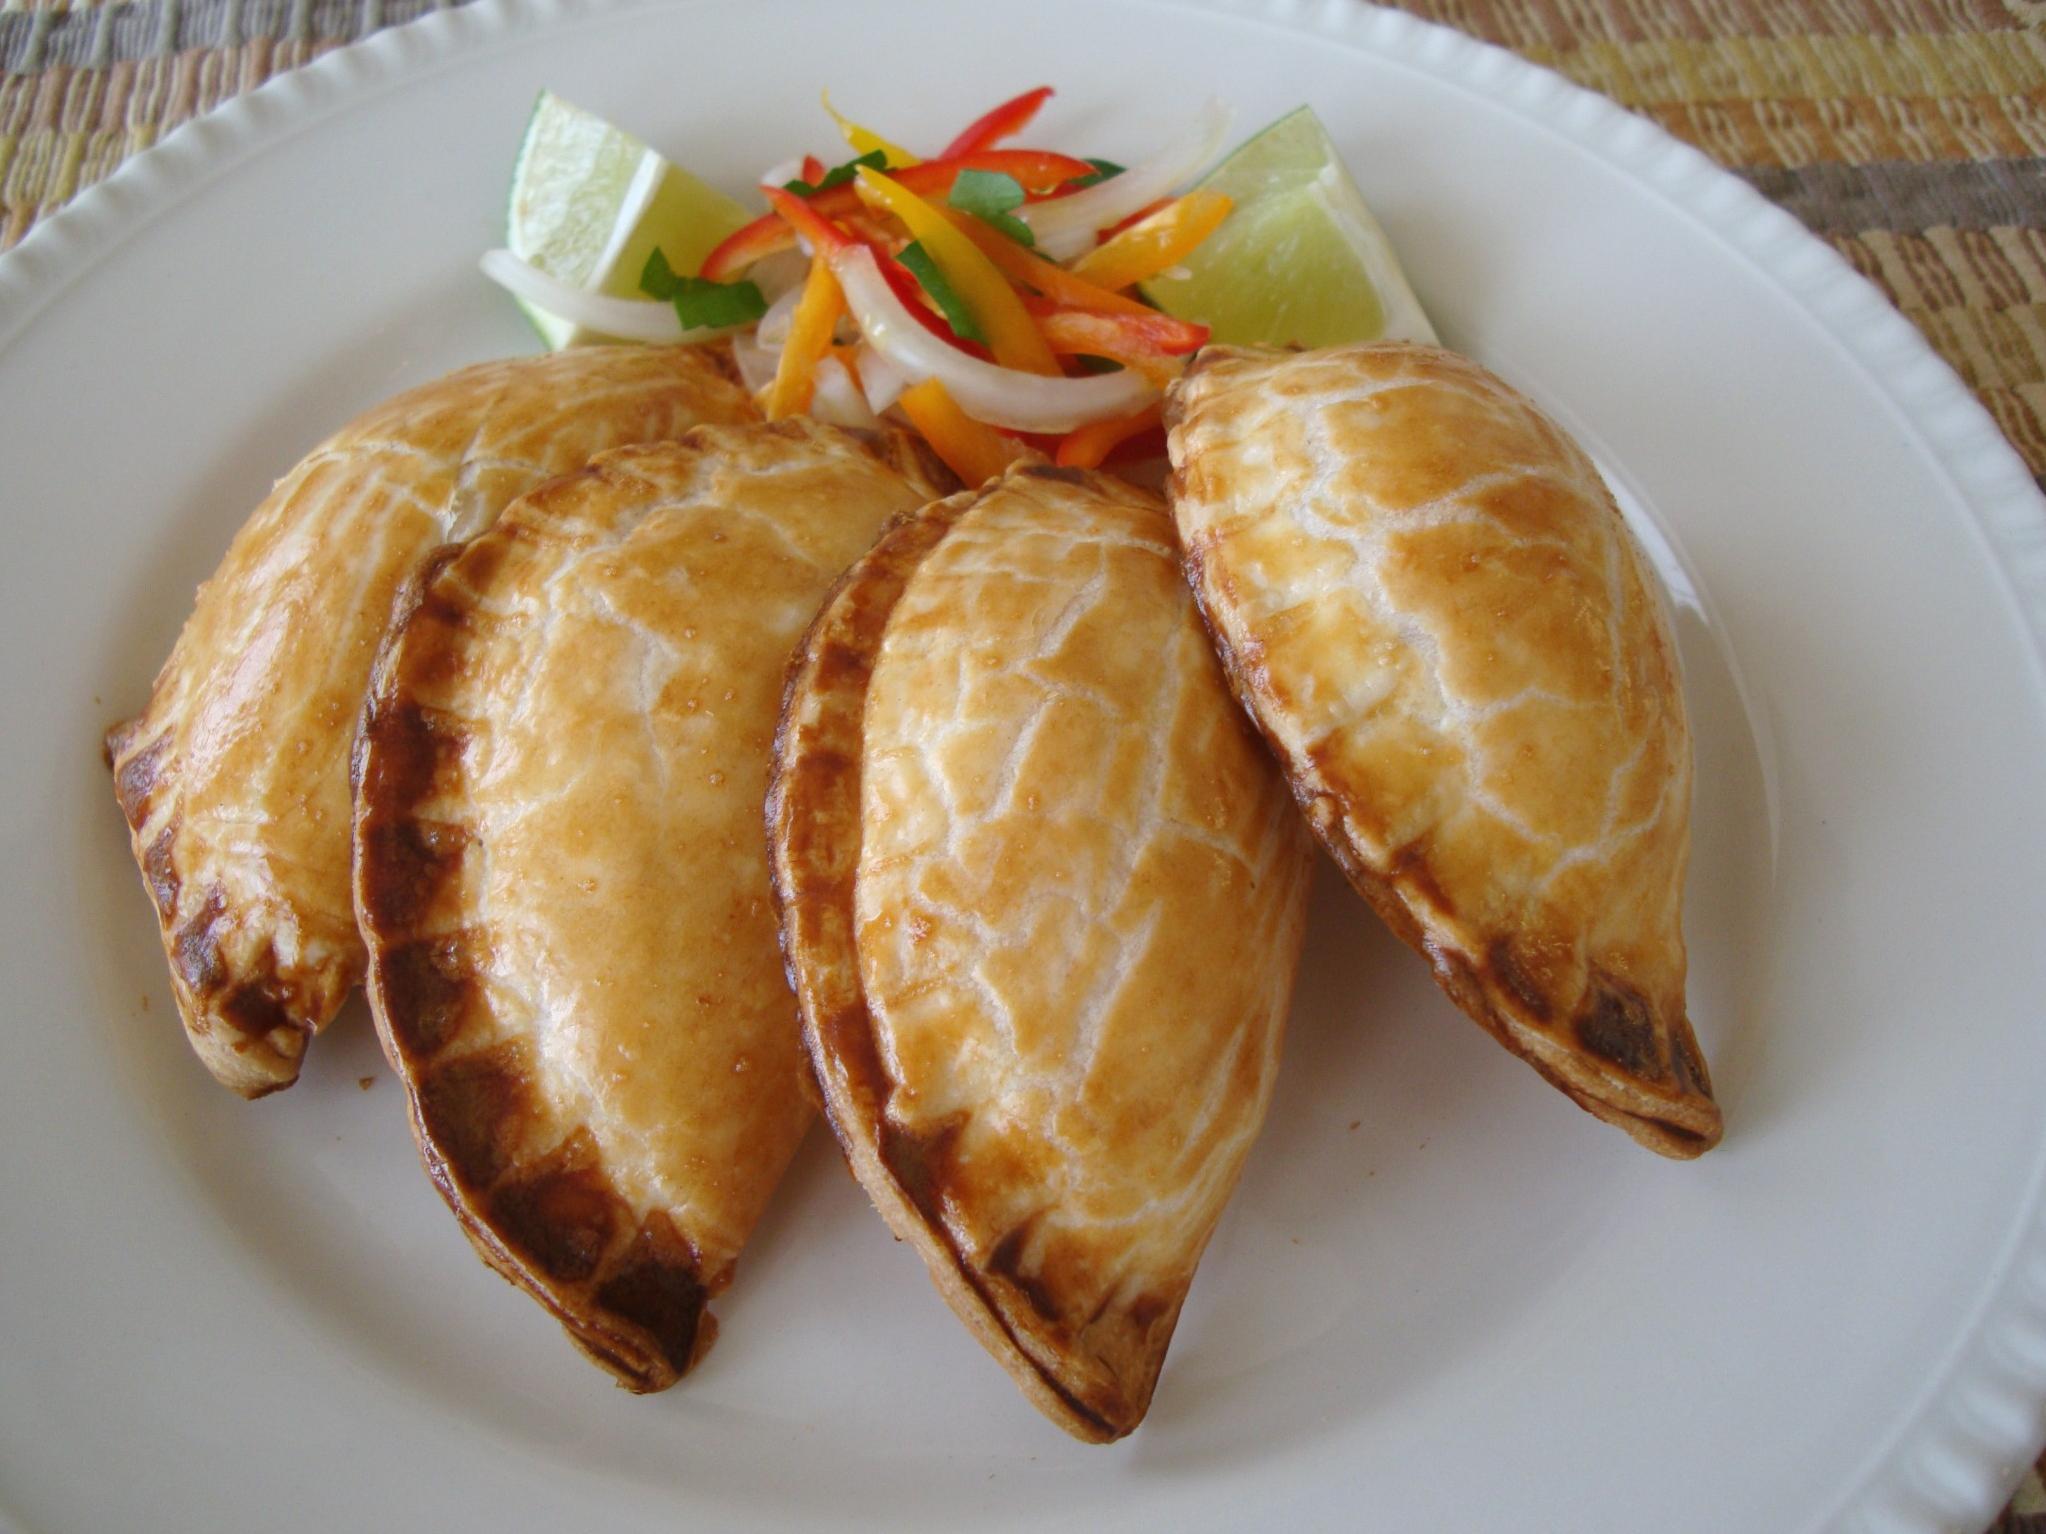  These empanadas are the perfect blend of savory goodness and crispy, buttery crust.